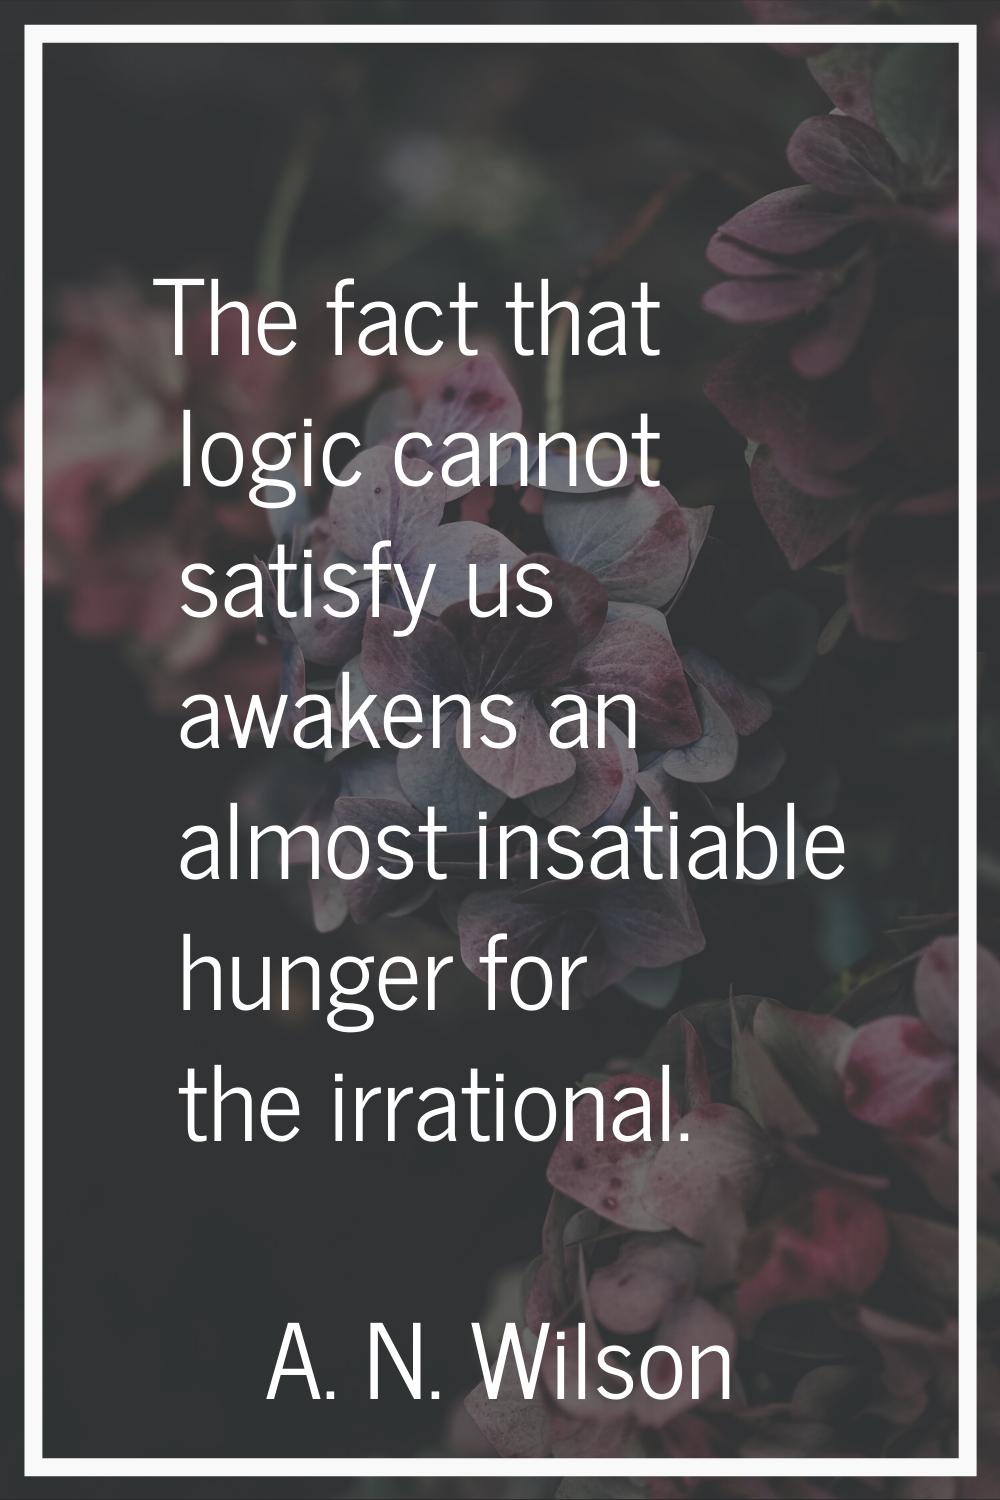 The fact that logic cannot satisfy us awakens an almost insatiable hunger for the irrational.